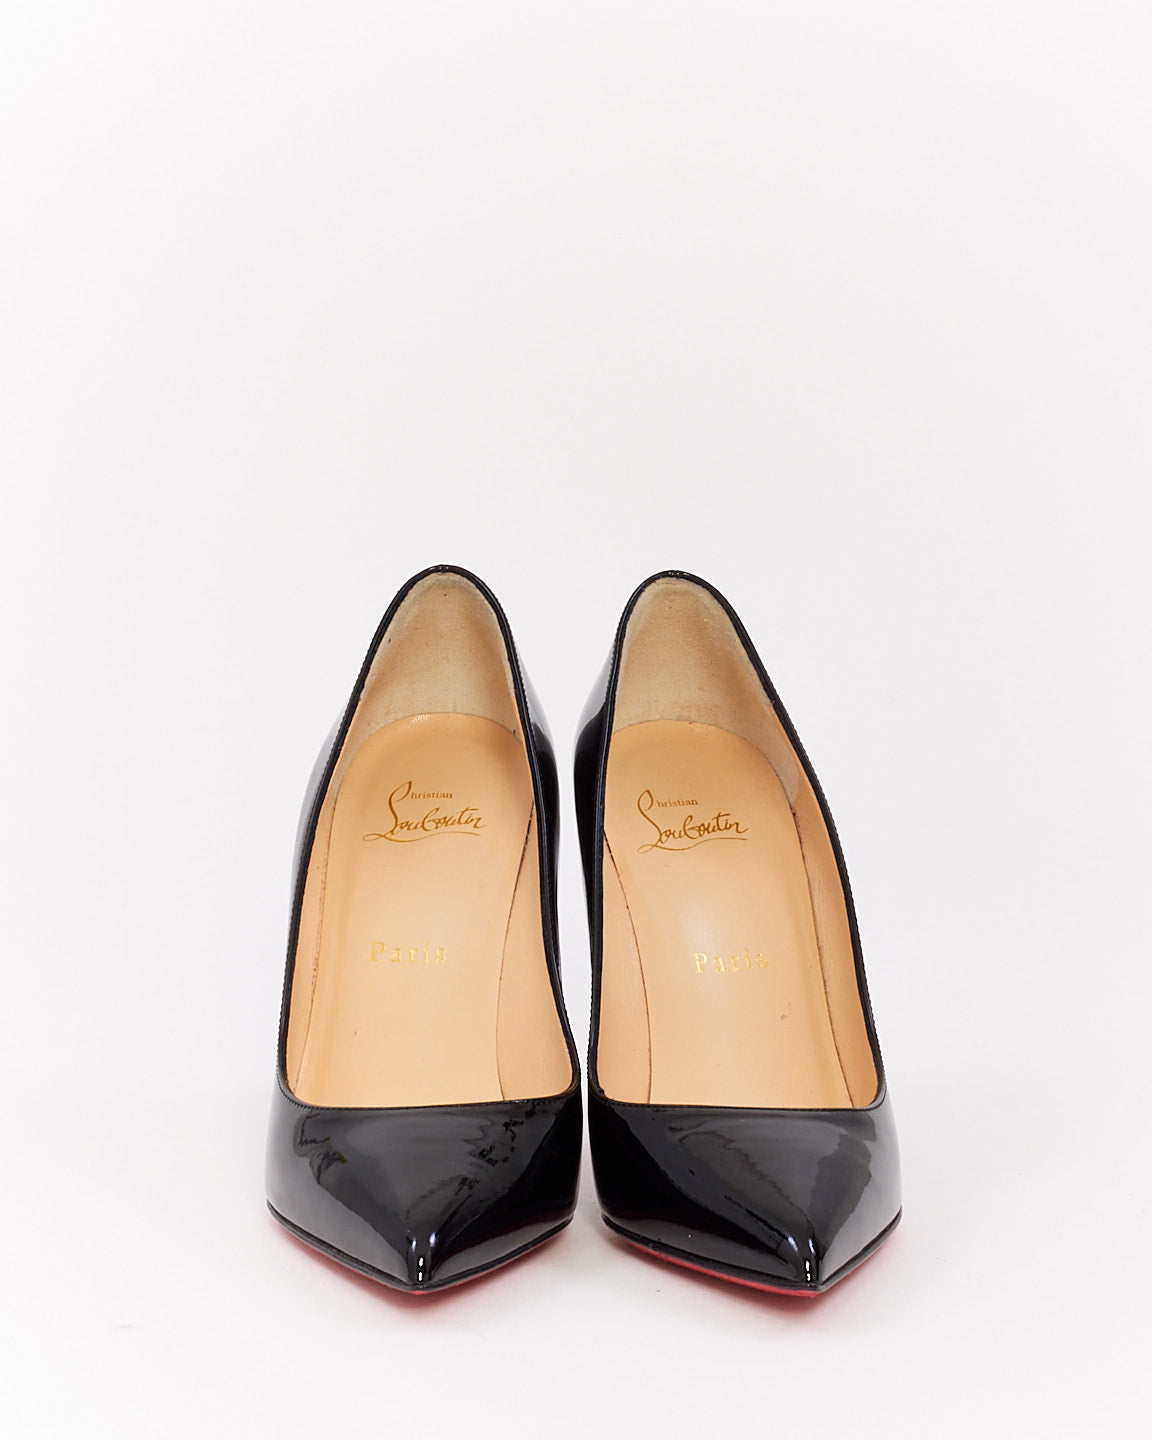 Christian Louboutin Black Patent Leather Pigalle 100mm Pumps - 37